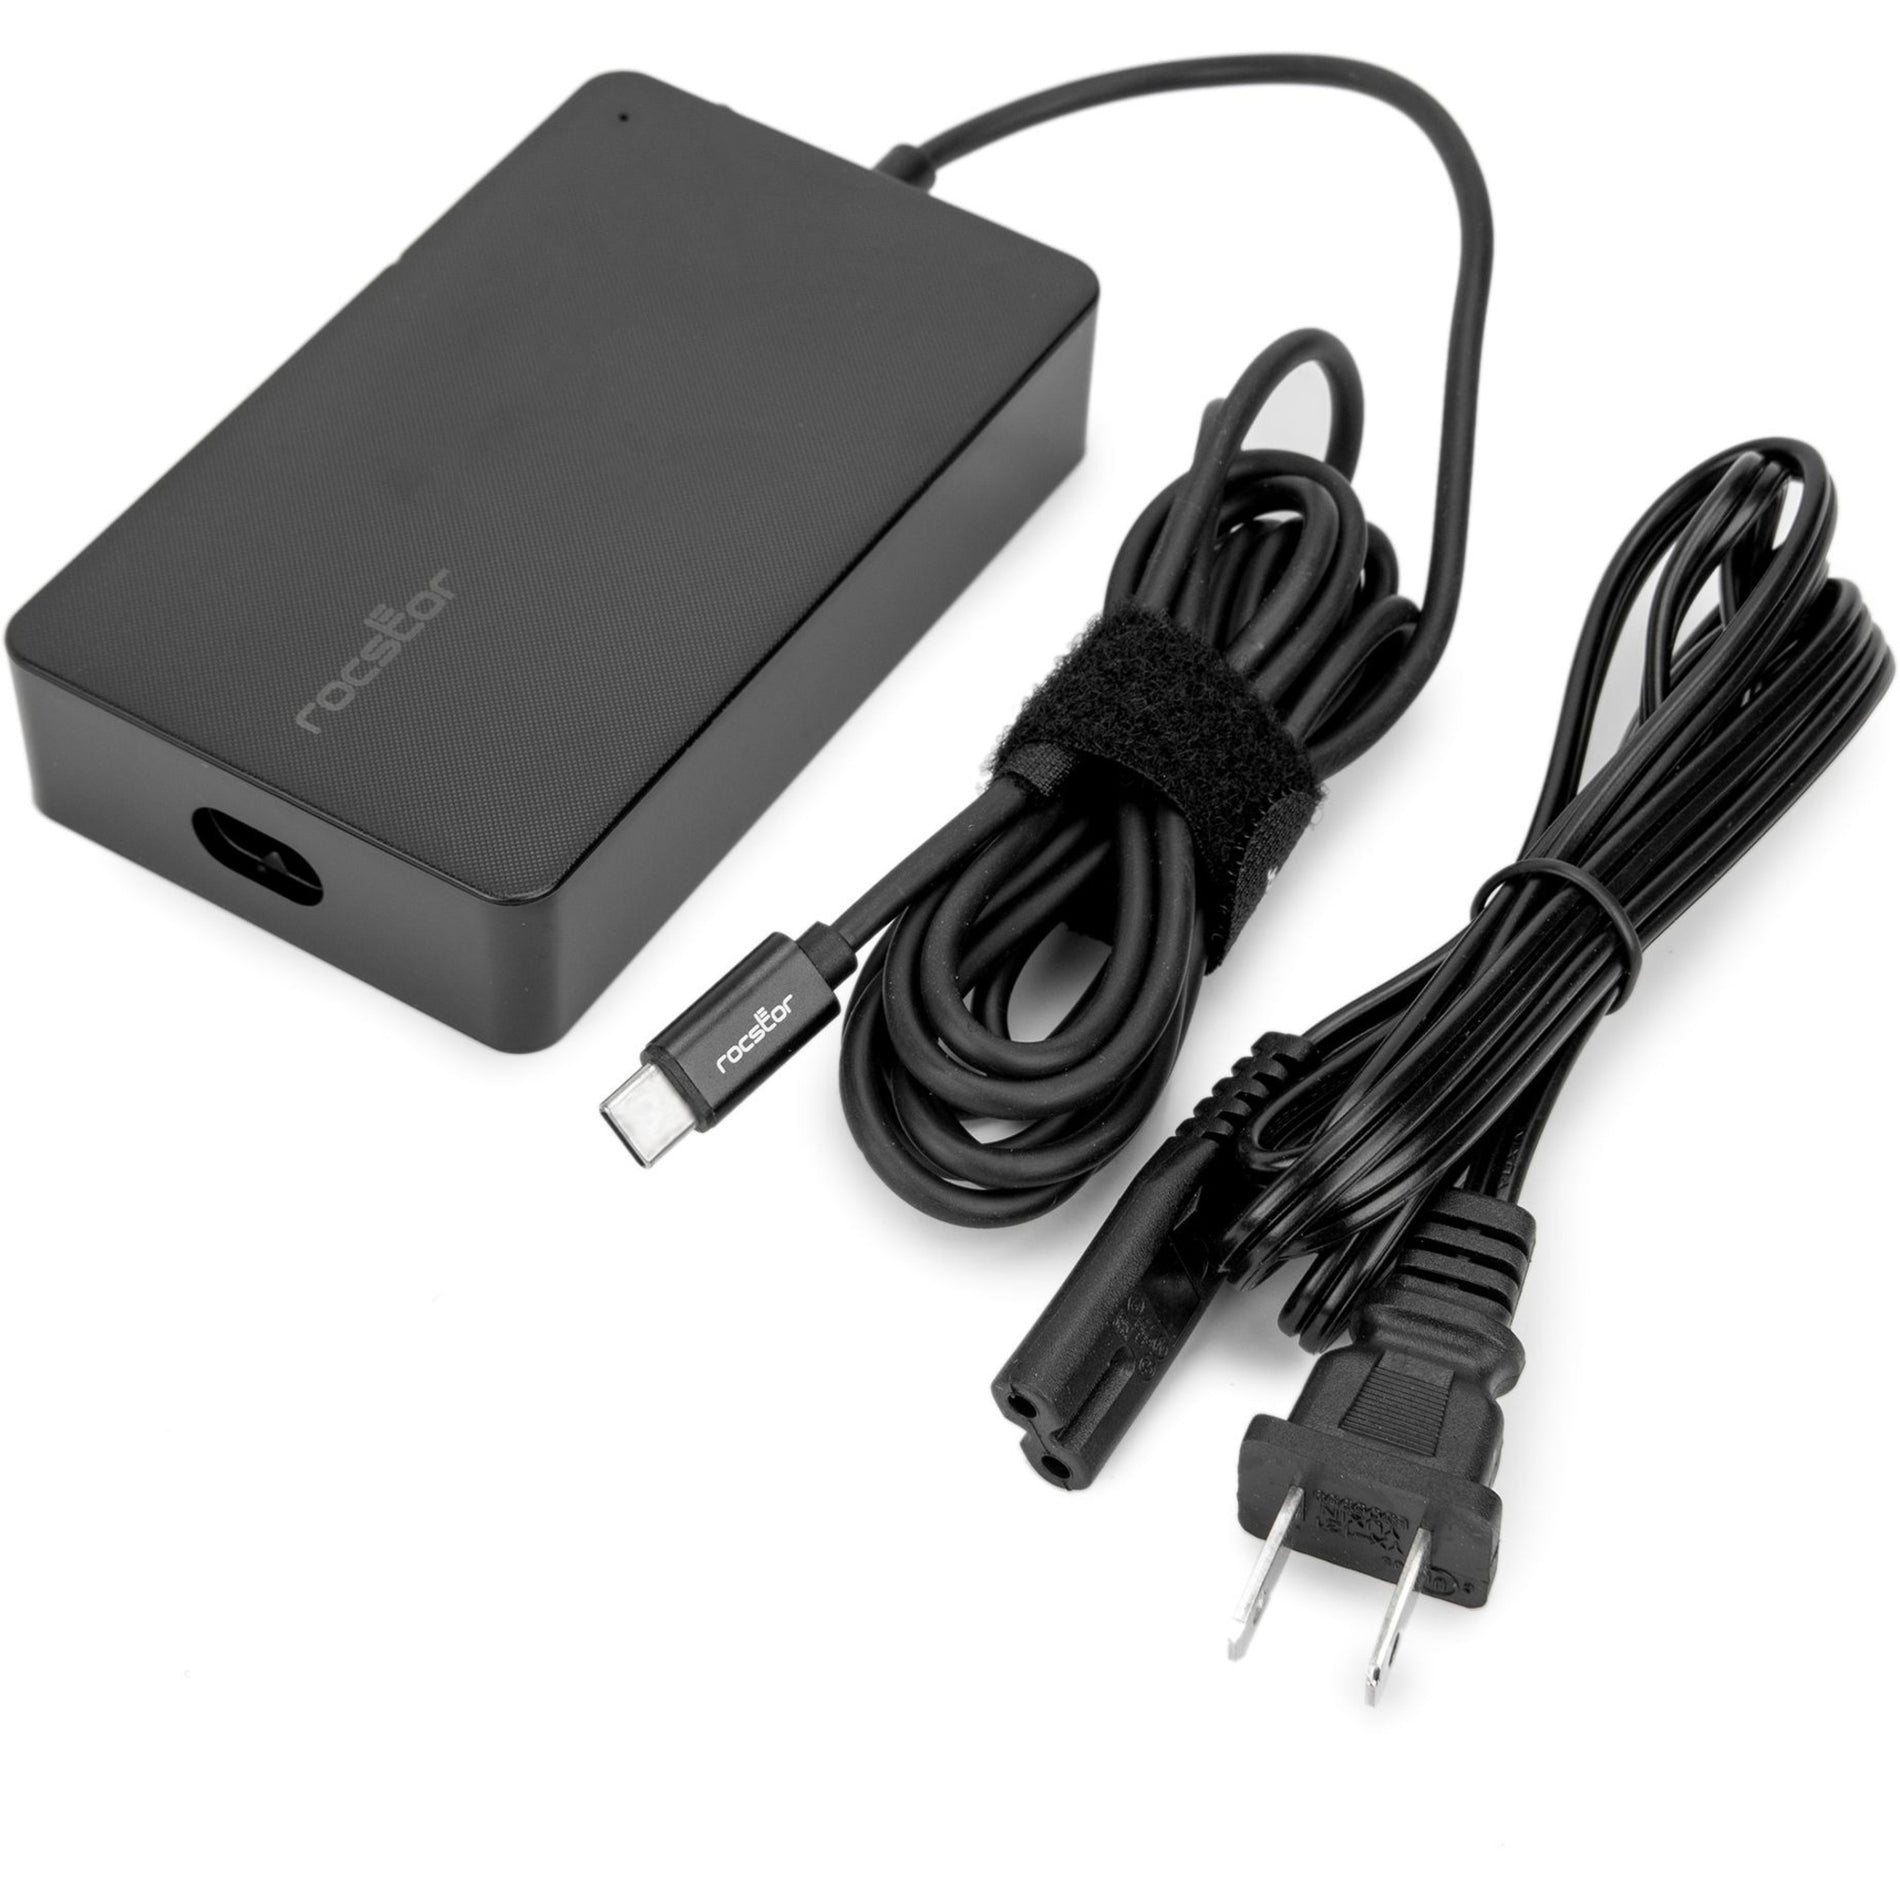 Rocstor Y10A274-B1 100W Smart USB-C Laptop Power Adapter Charger, Fast Charging for MacBook, Surface, iPad, and More